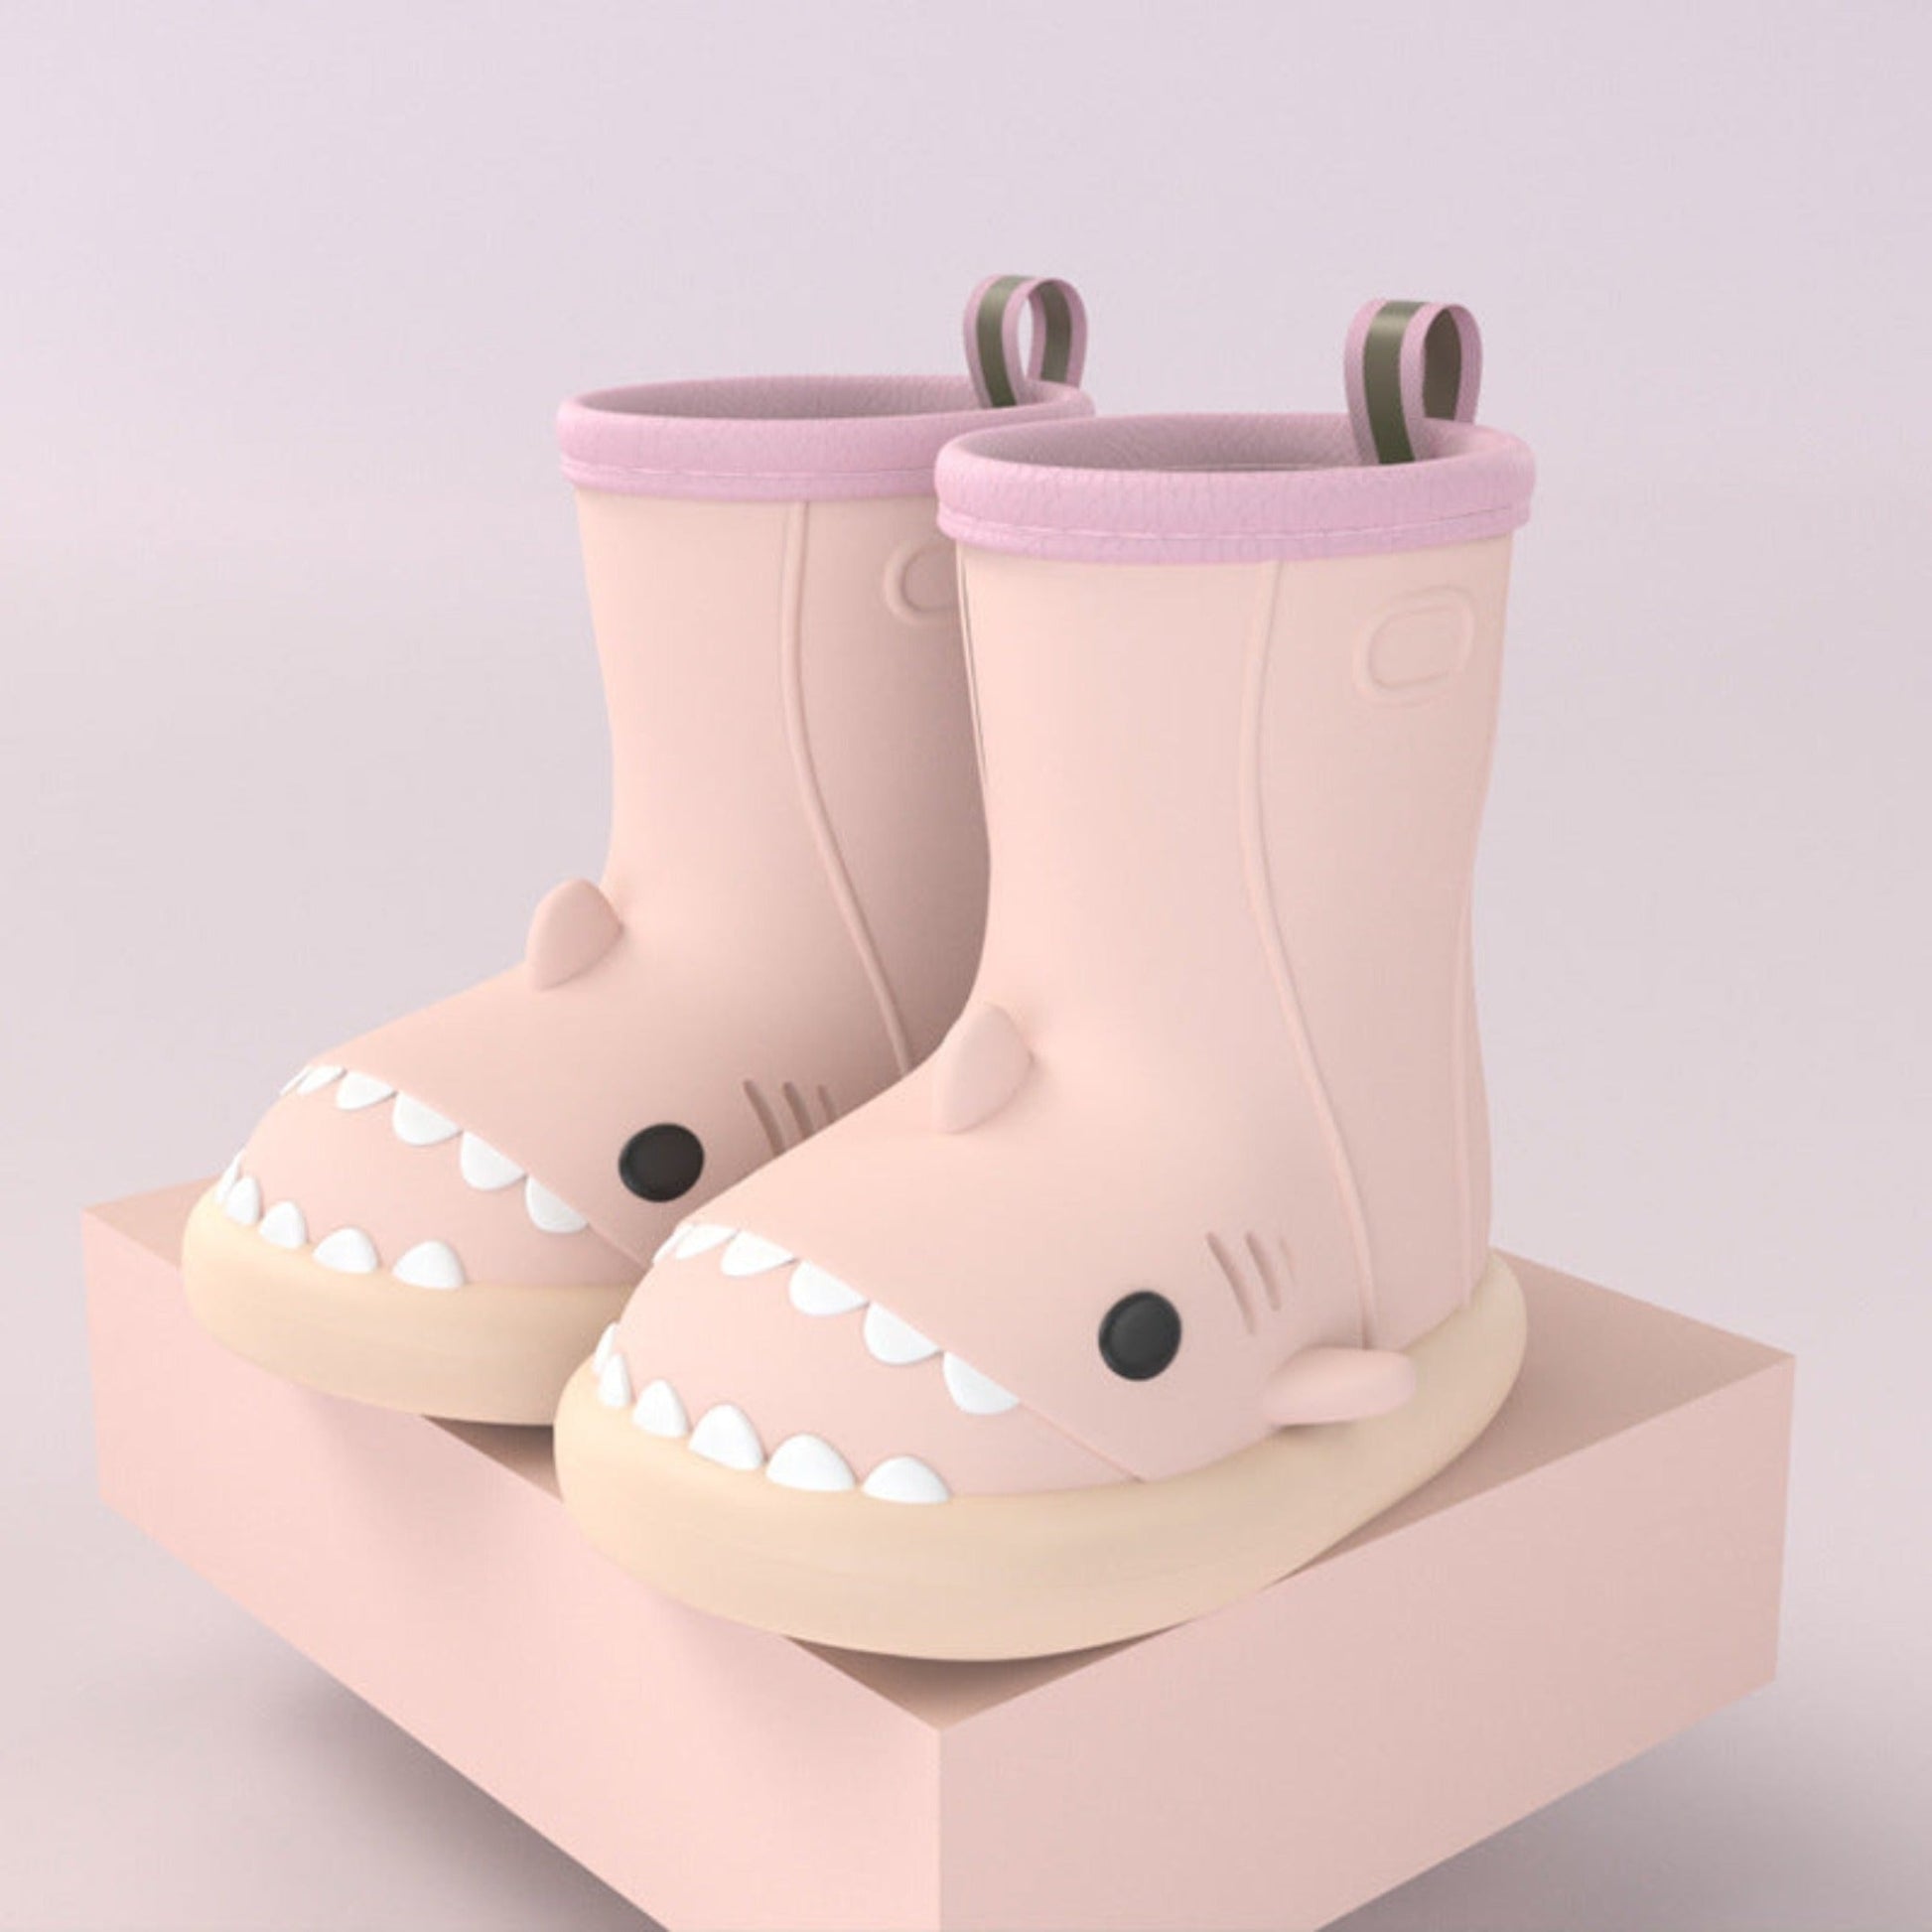 pair of pink shark rain boots for kids on a pink block for display